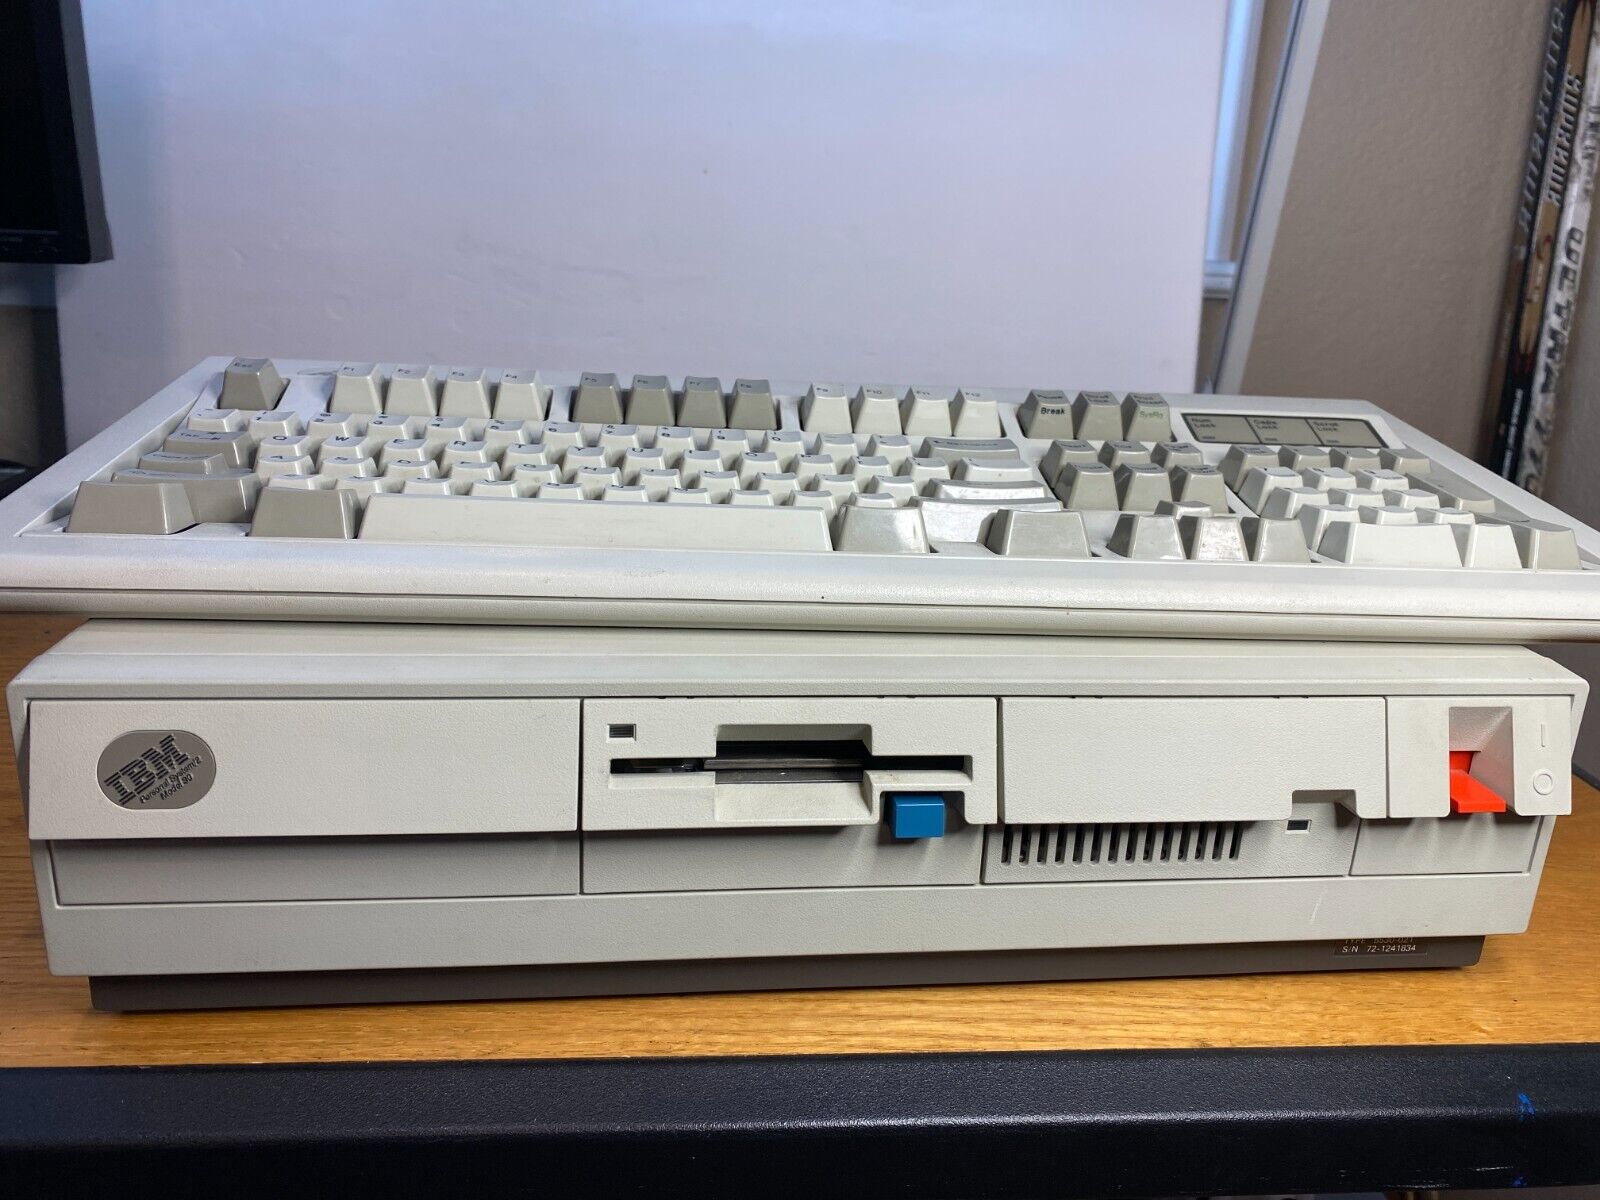 IBM Personal System PS/2 Computer Model 8530-021 20MB HDD and 8087 coprocessor